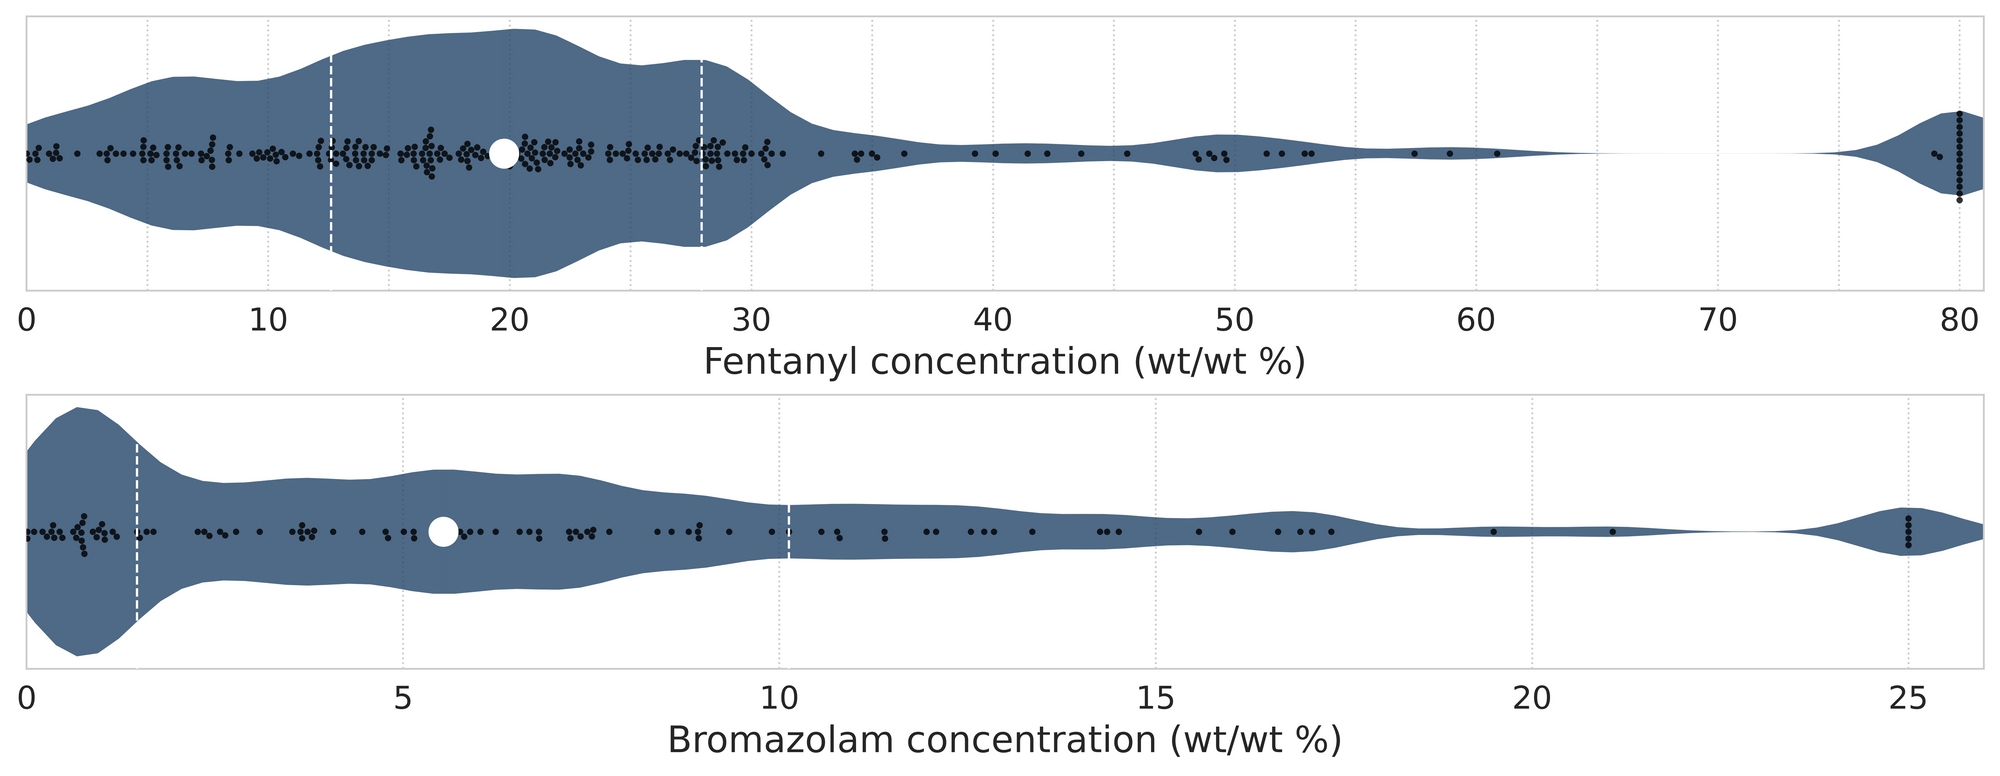 Figure 4. Violin plots of fentanyl (top) and bromazolam (bottom) positive samples quantified during February across all collection locations/methods.